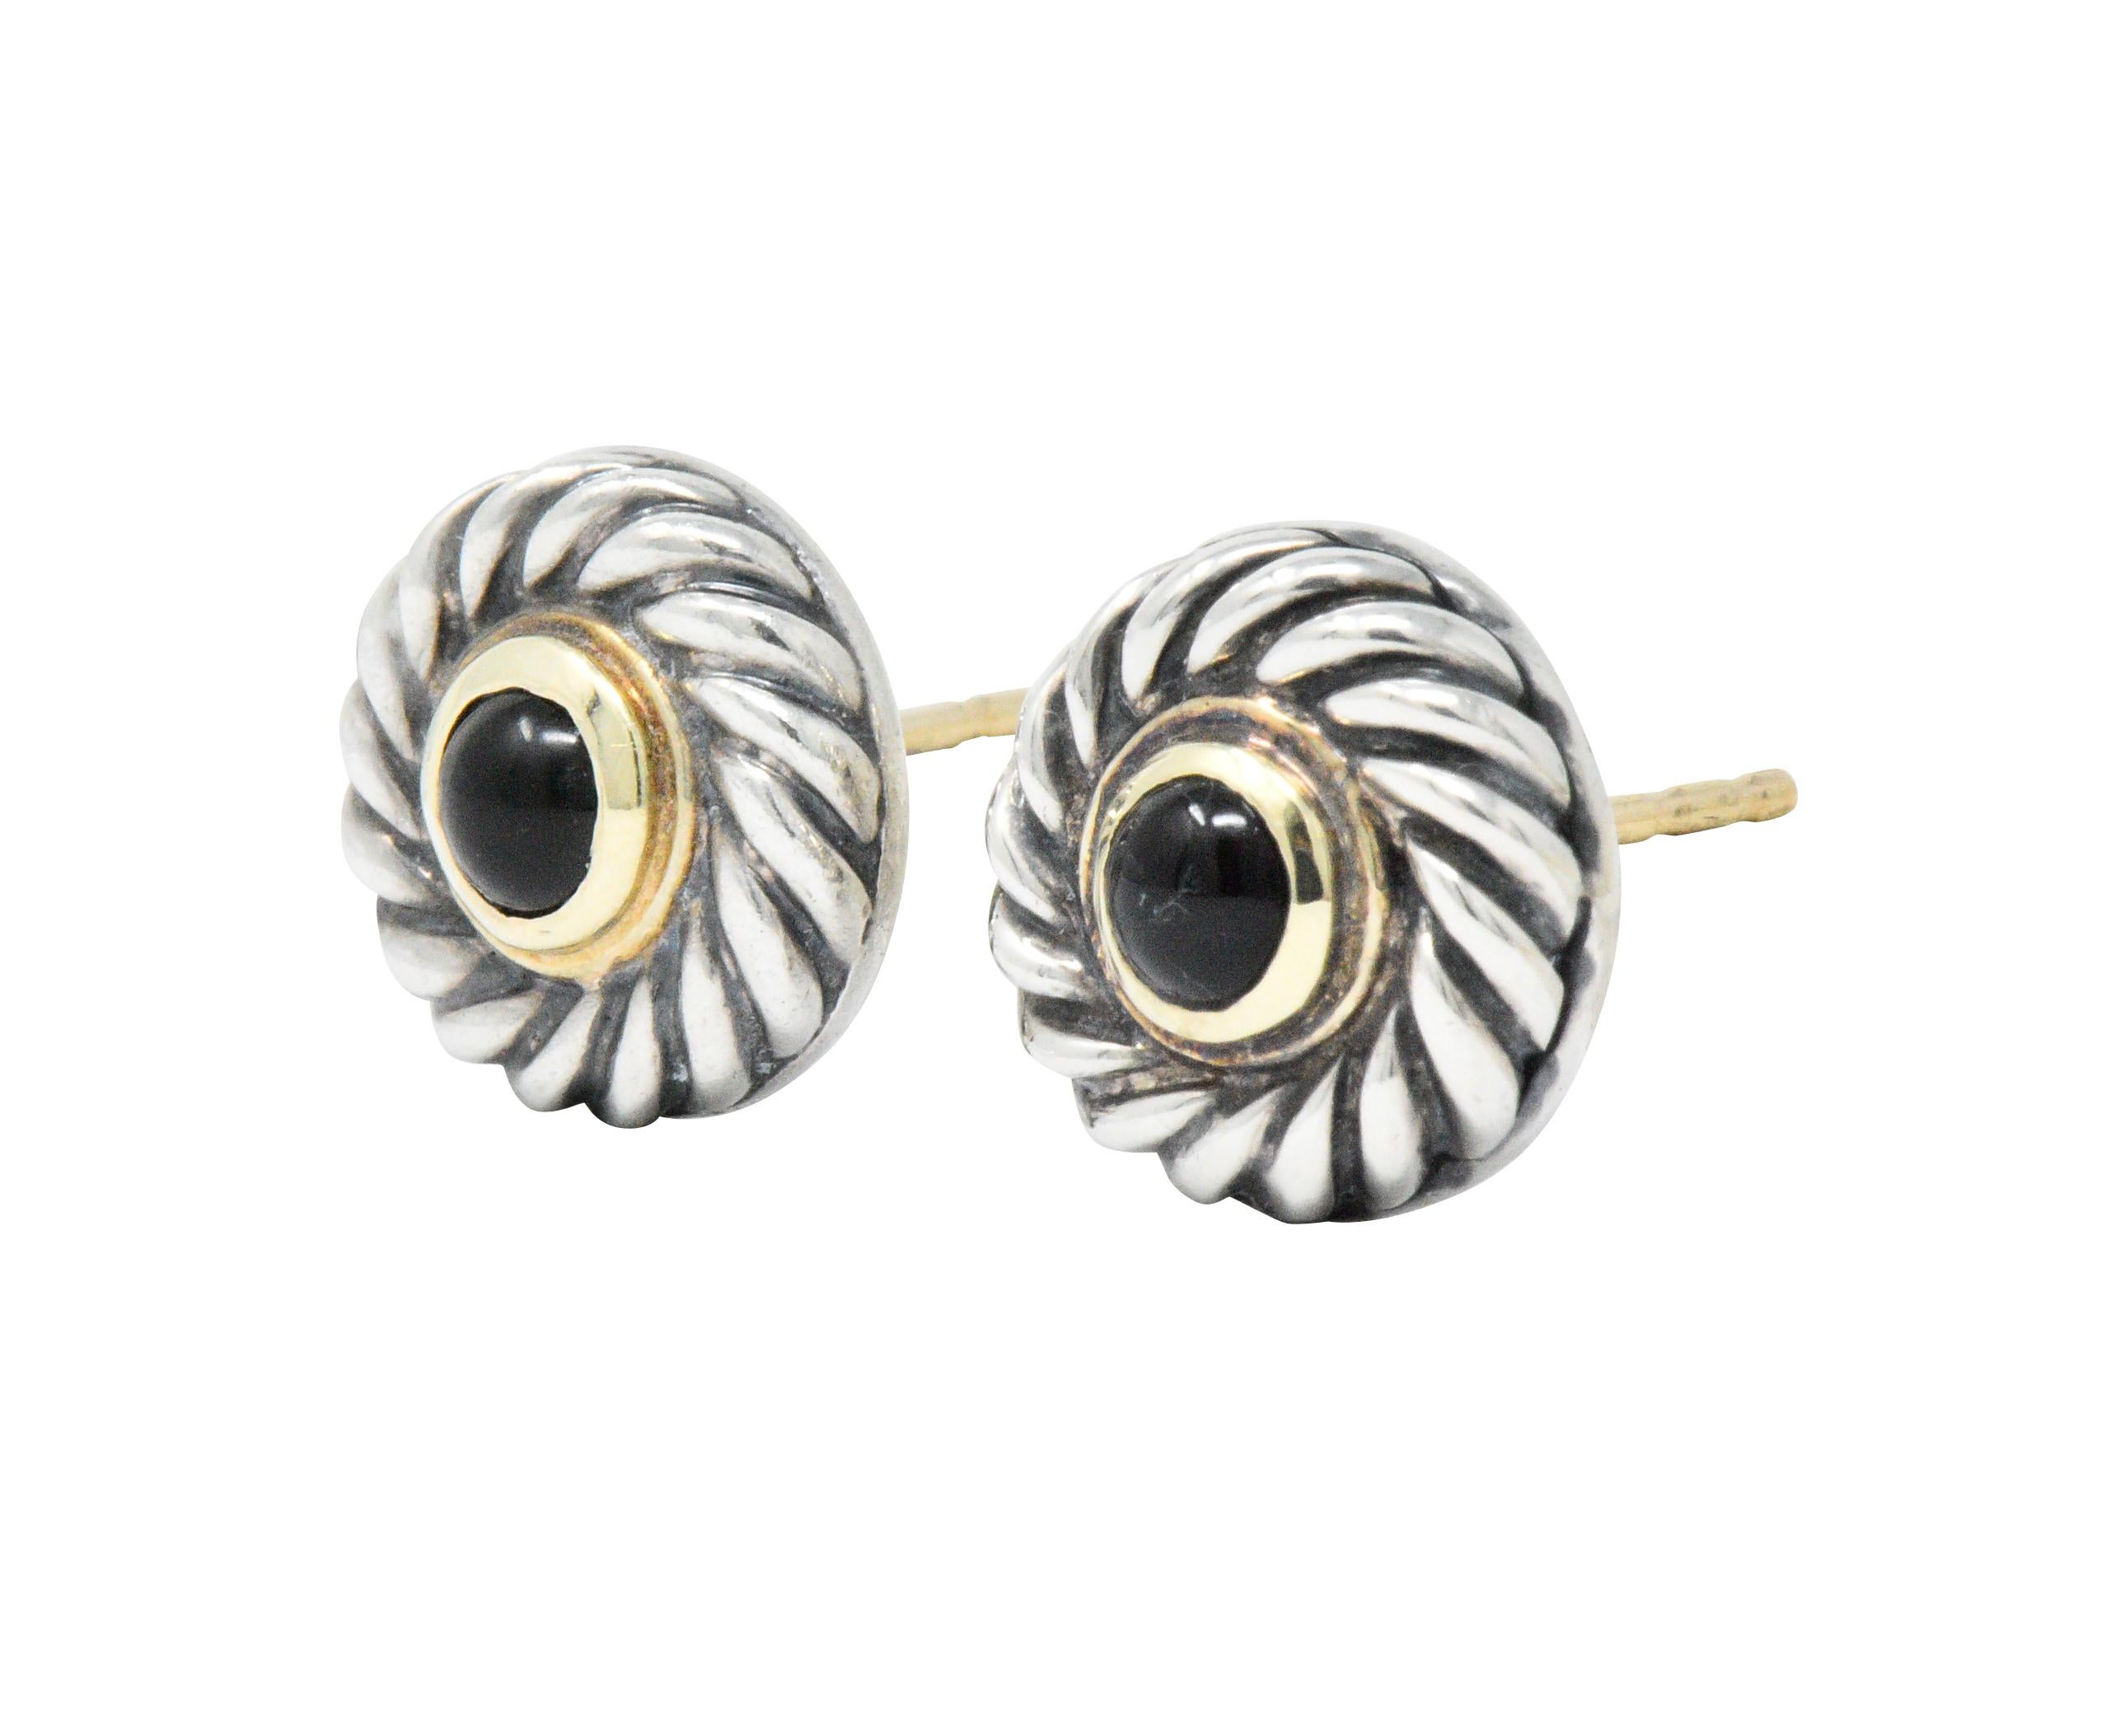 Featuring a sterling silver base with David Yurman signature cable twist design

Adorned with a round cabochon black onyx that is accented with 14k gold border

Pierced post earrings

Signed 925 DY 585

Known as Cookie Earrings

Measuring 11 mm in